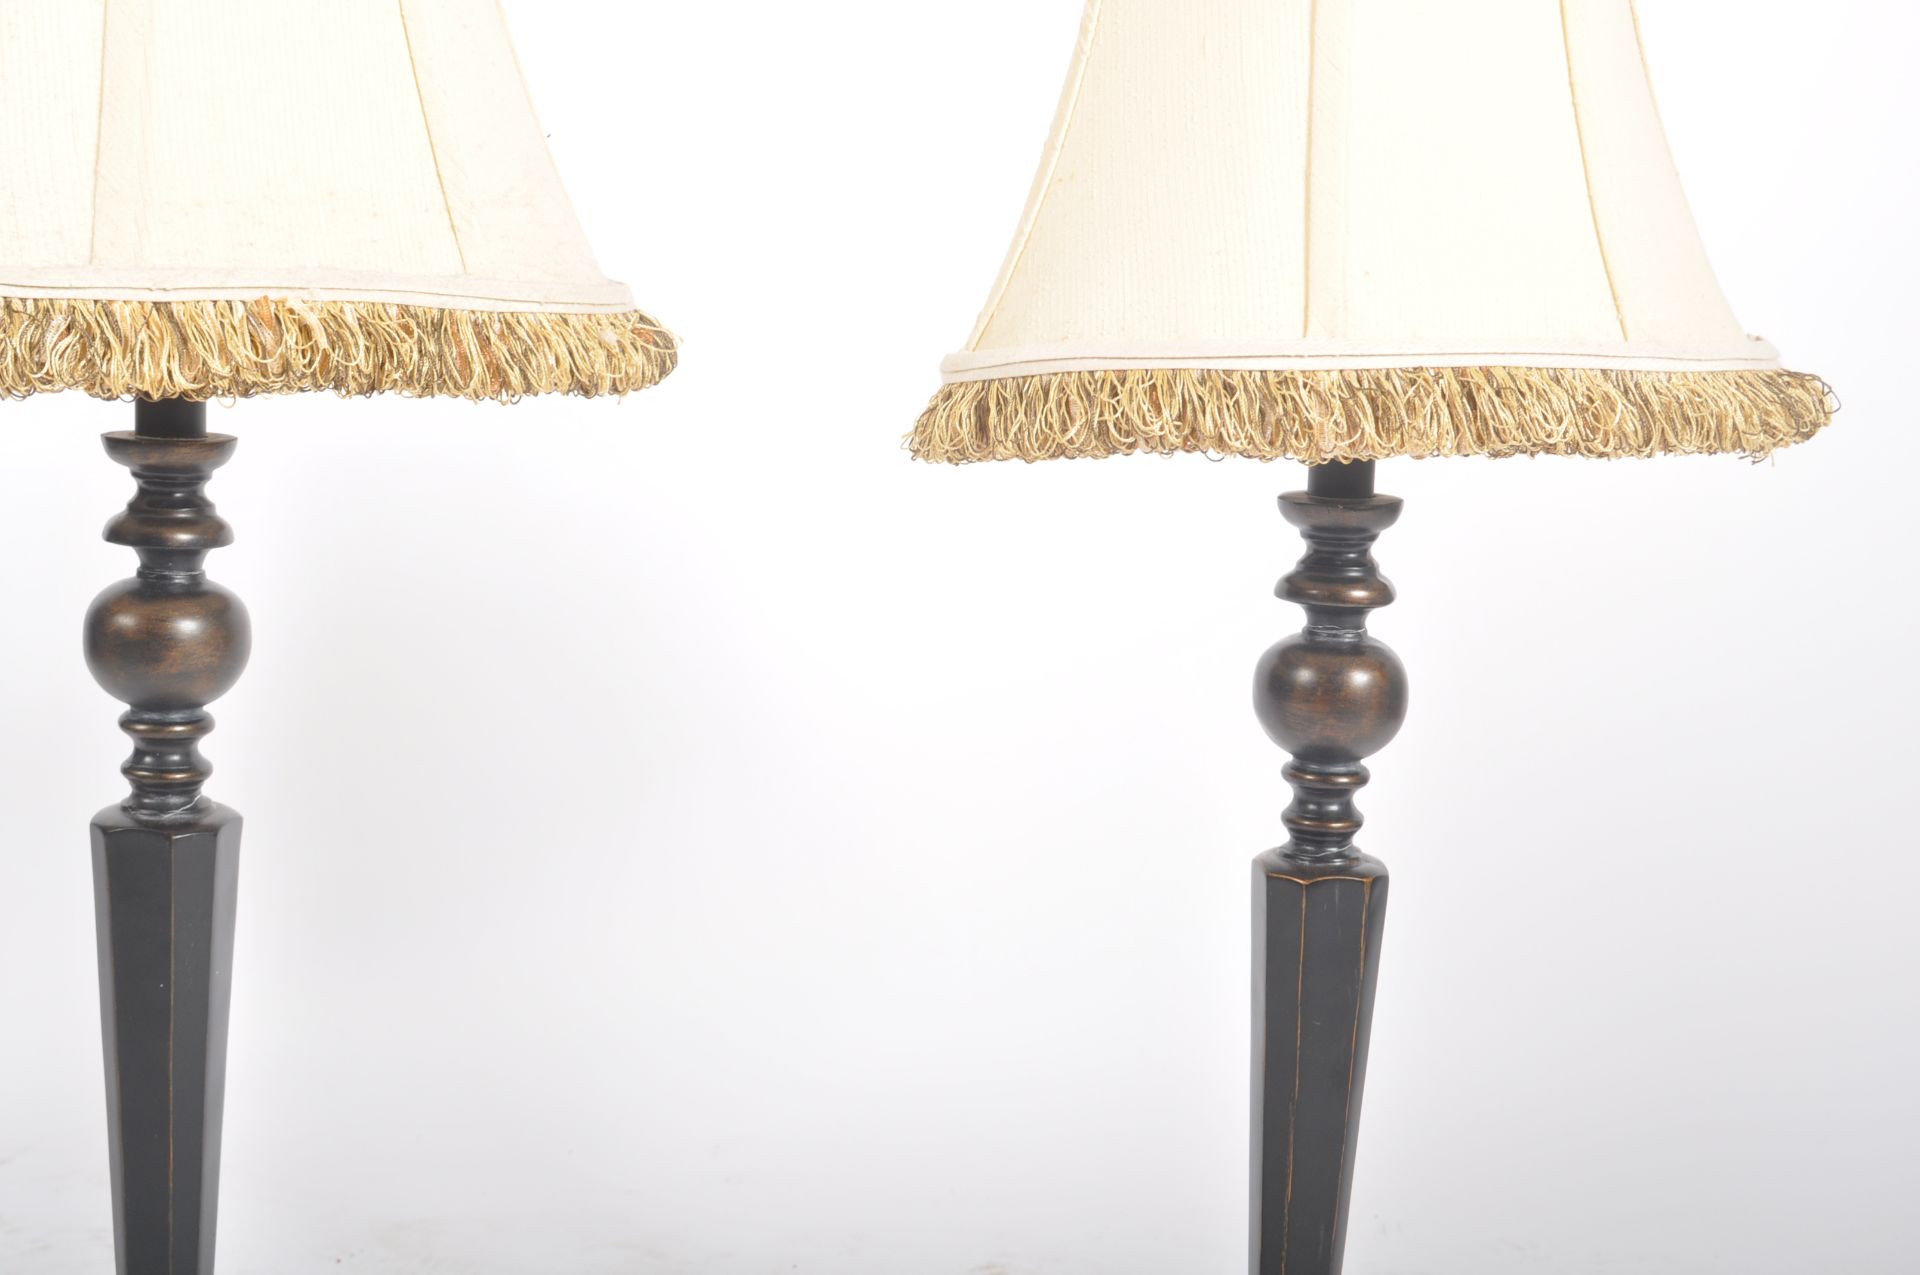 PAIR OF CONTEMPORARY BRONZE EFFECT TABLE LAMPS - Image 2 of 4